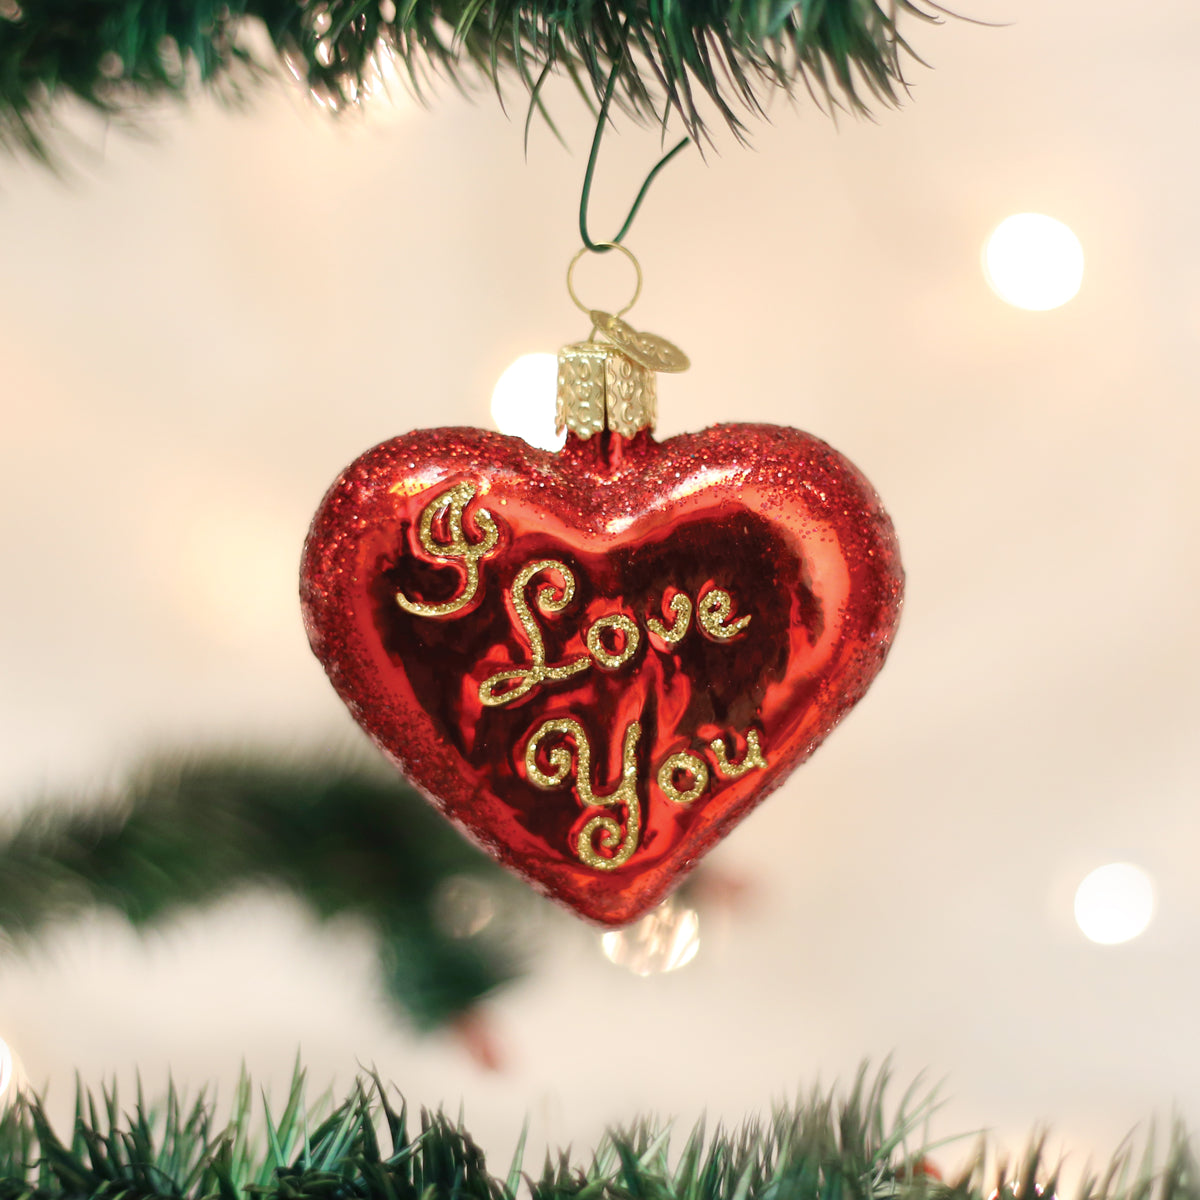 Old World Christmas I Love You Heart Ornament    